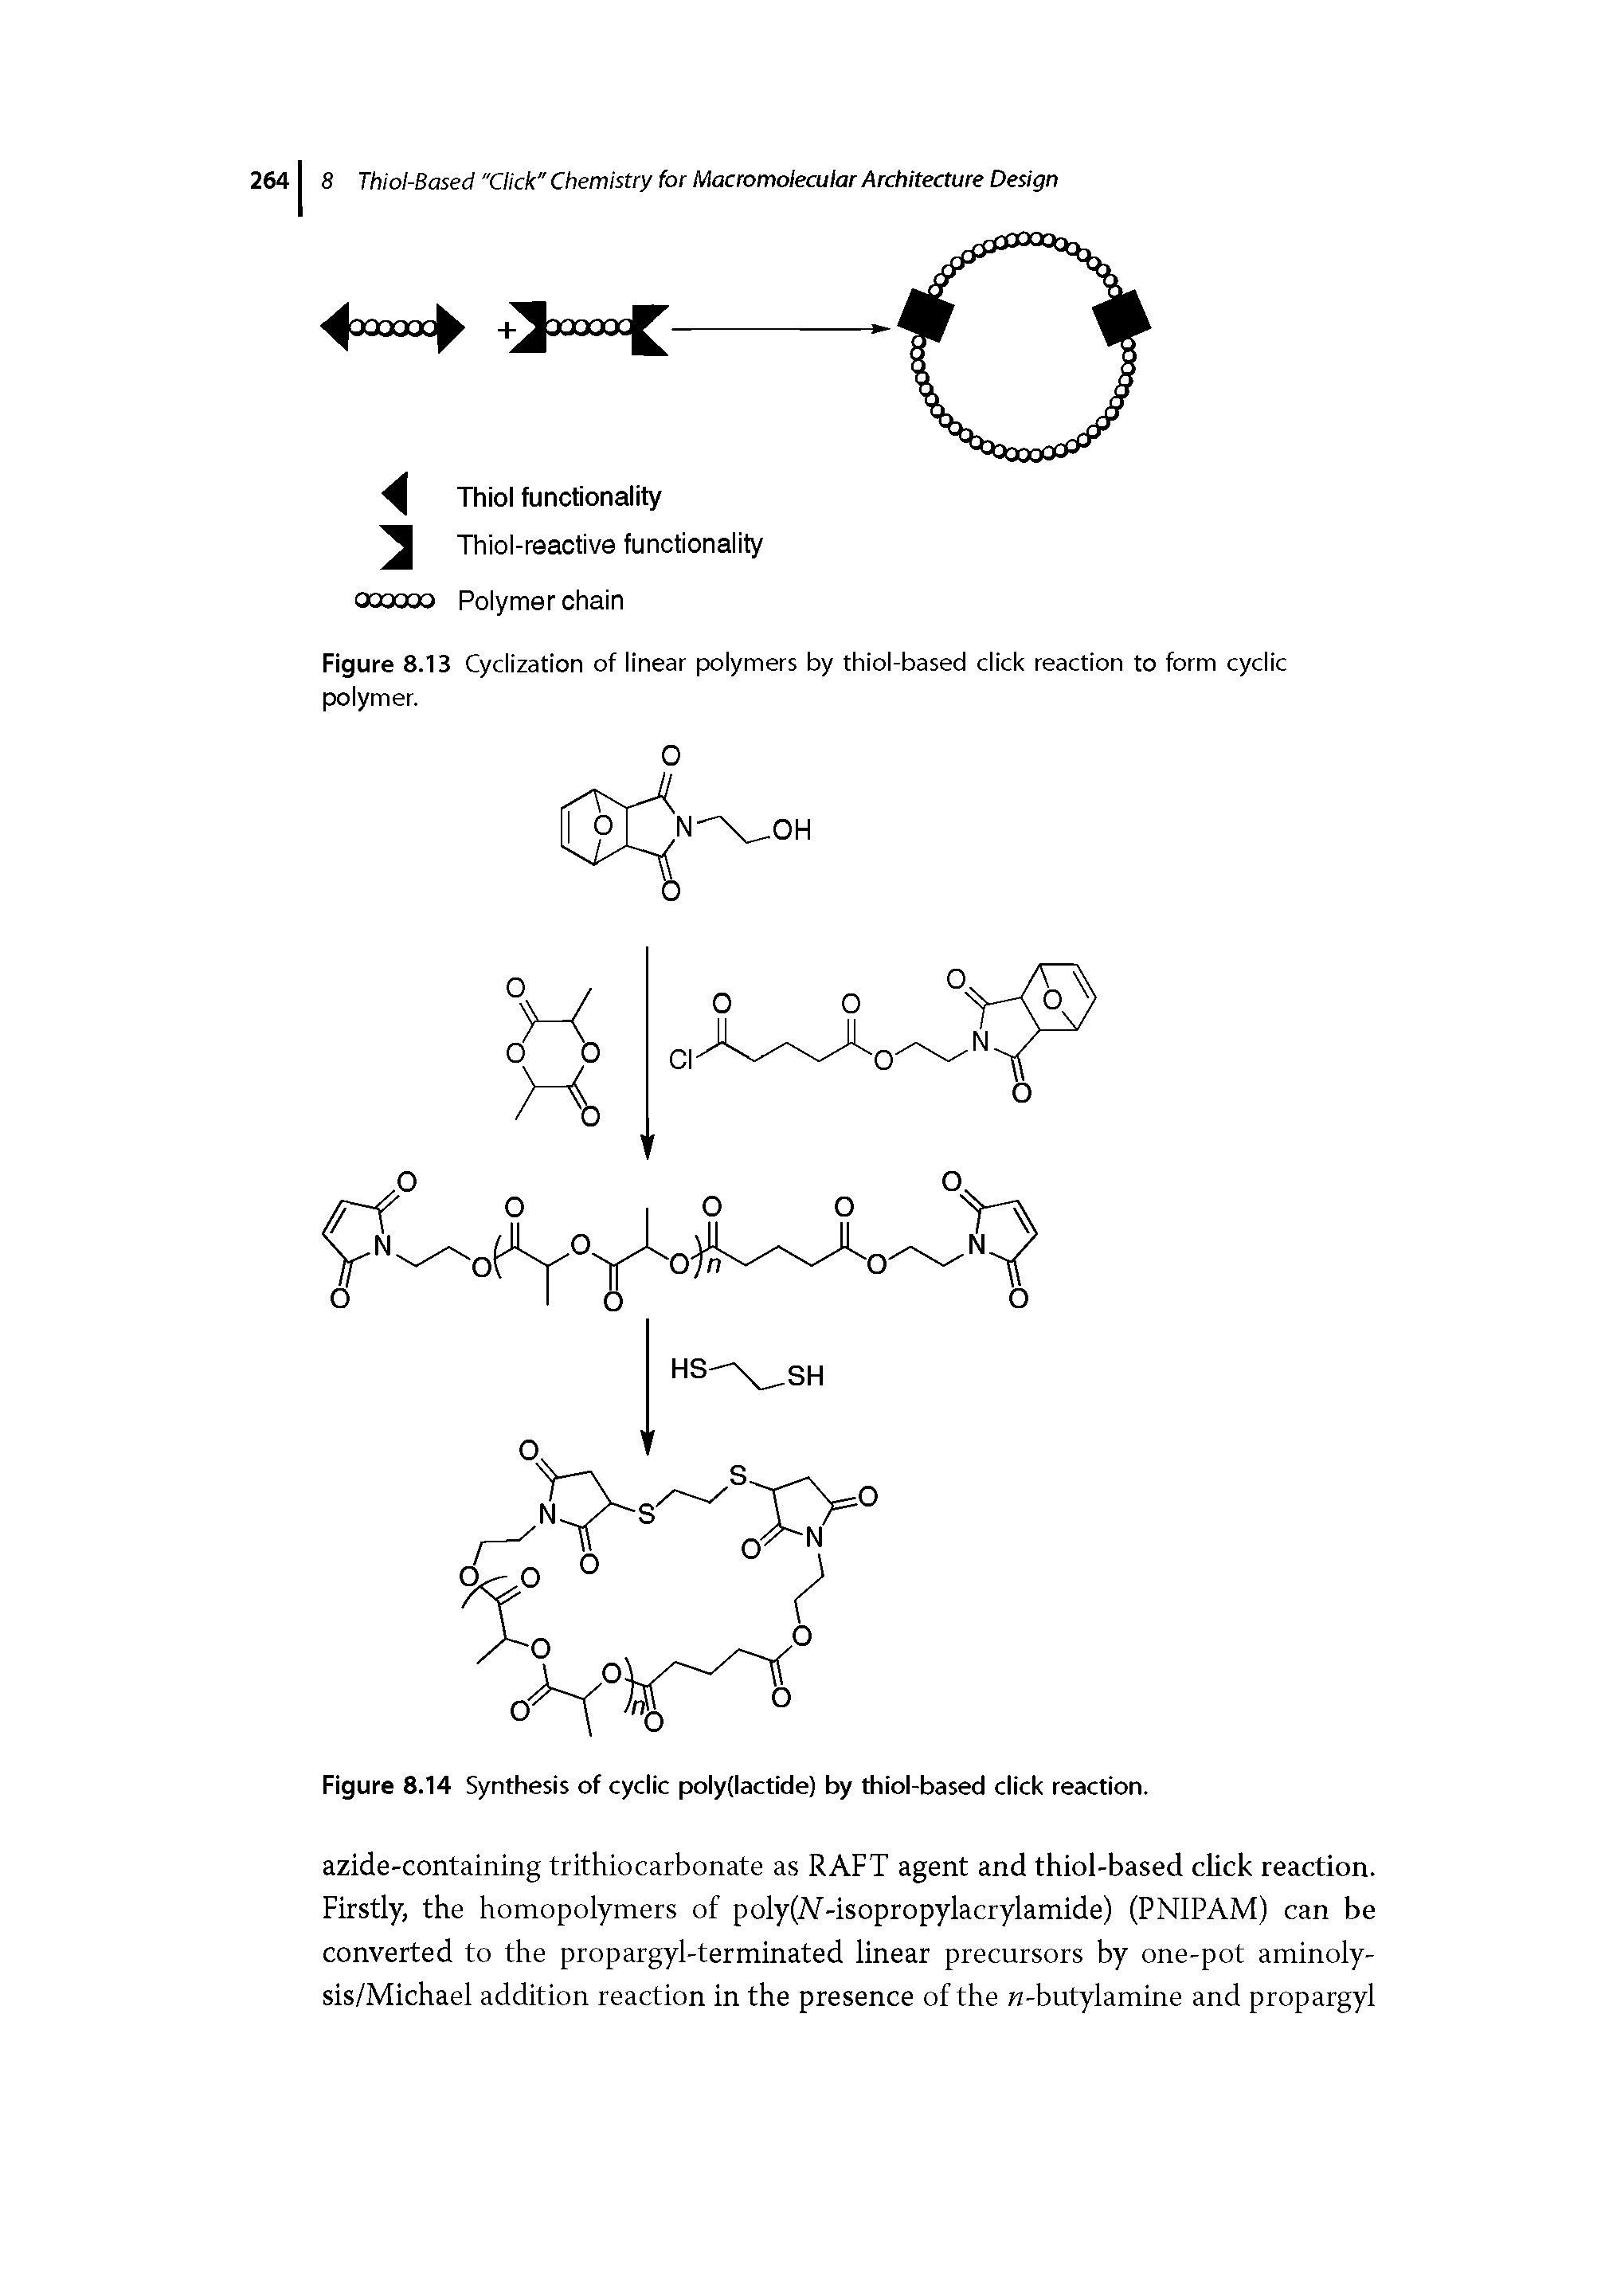 Figure 8.14 Synthesis of cyclic poly(lactide) by thiol-based click reaction.